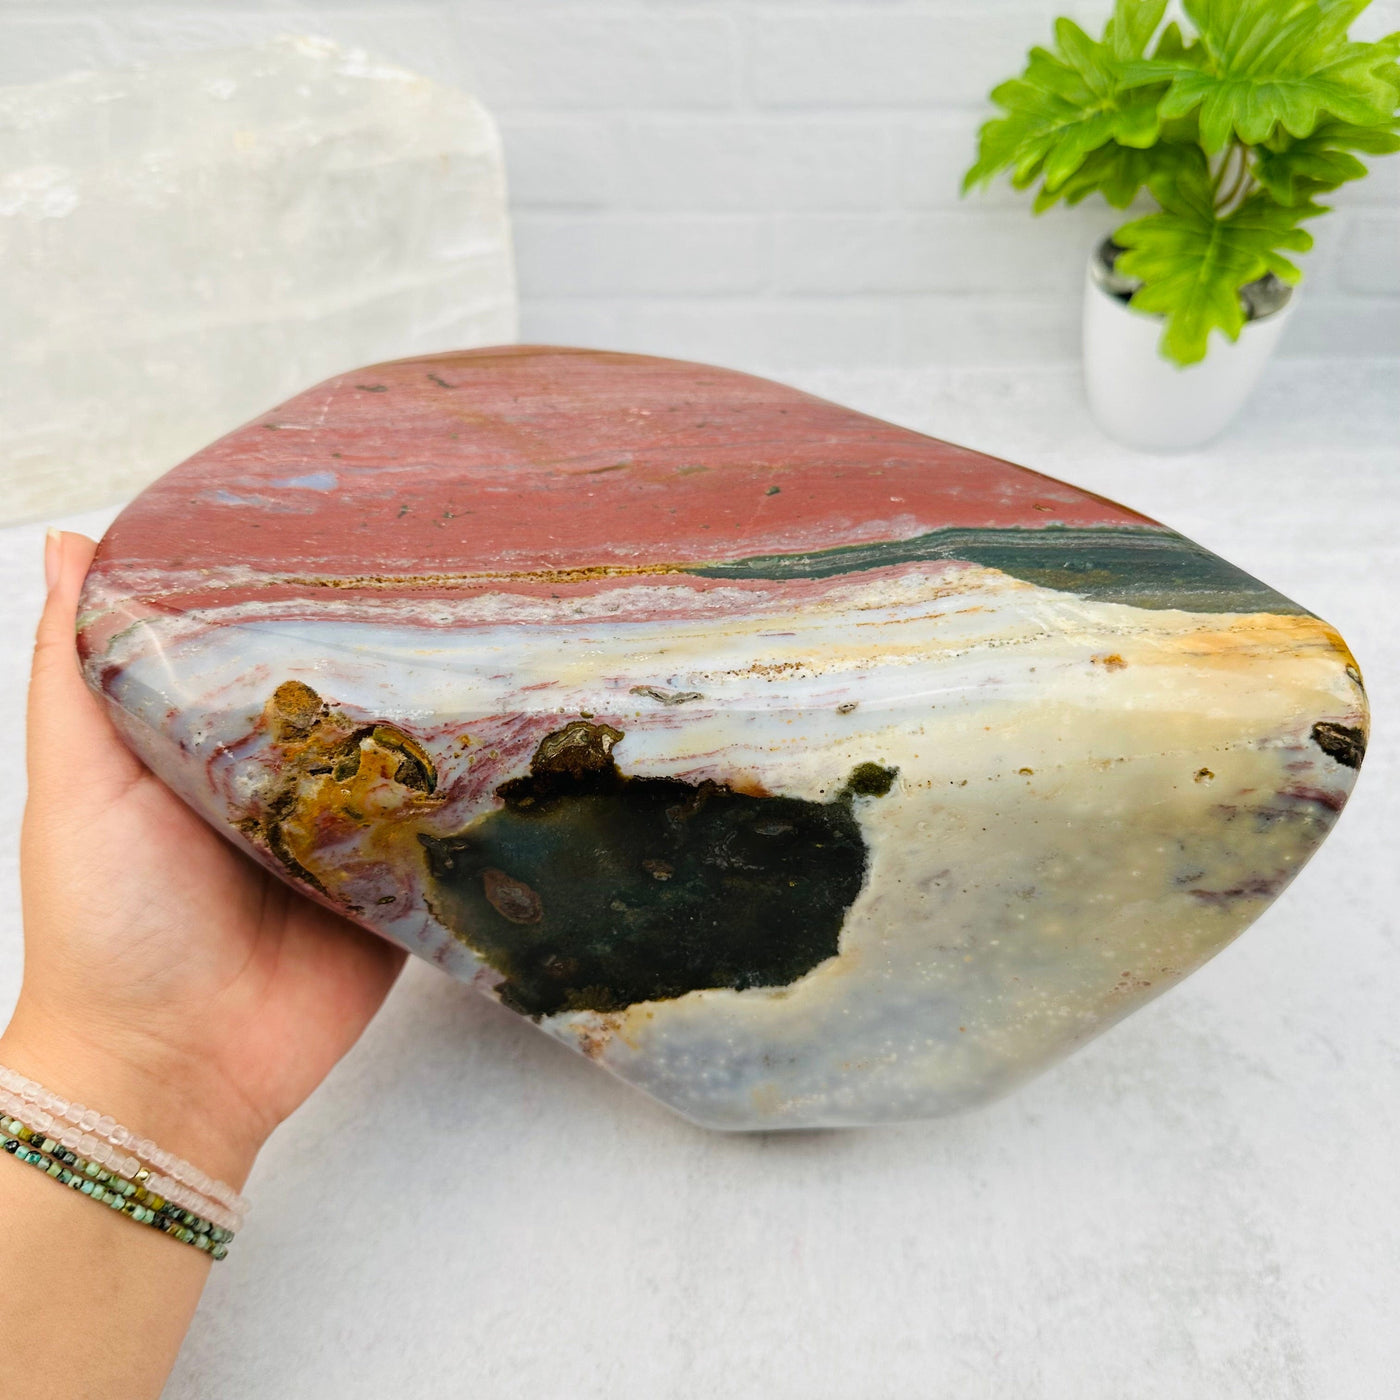  Ocean Jasper Large Tumbled Stone in hand for size reference 